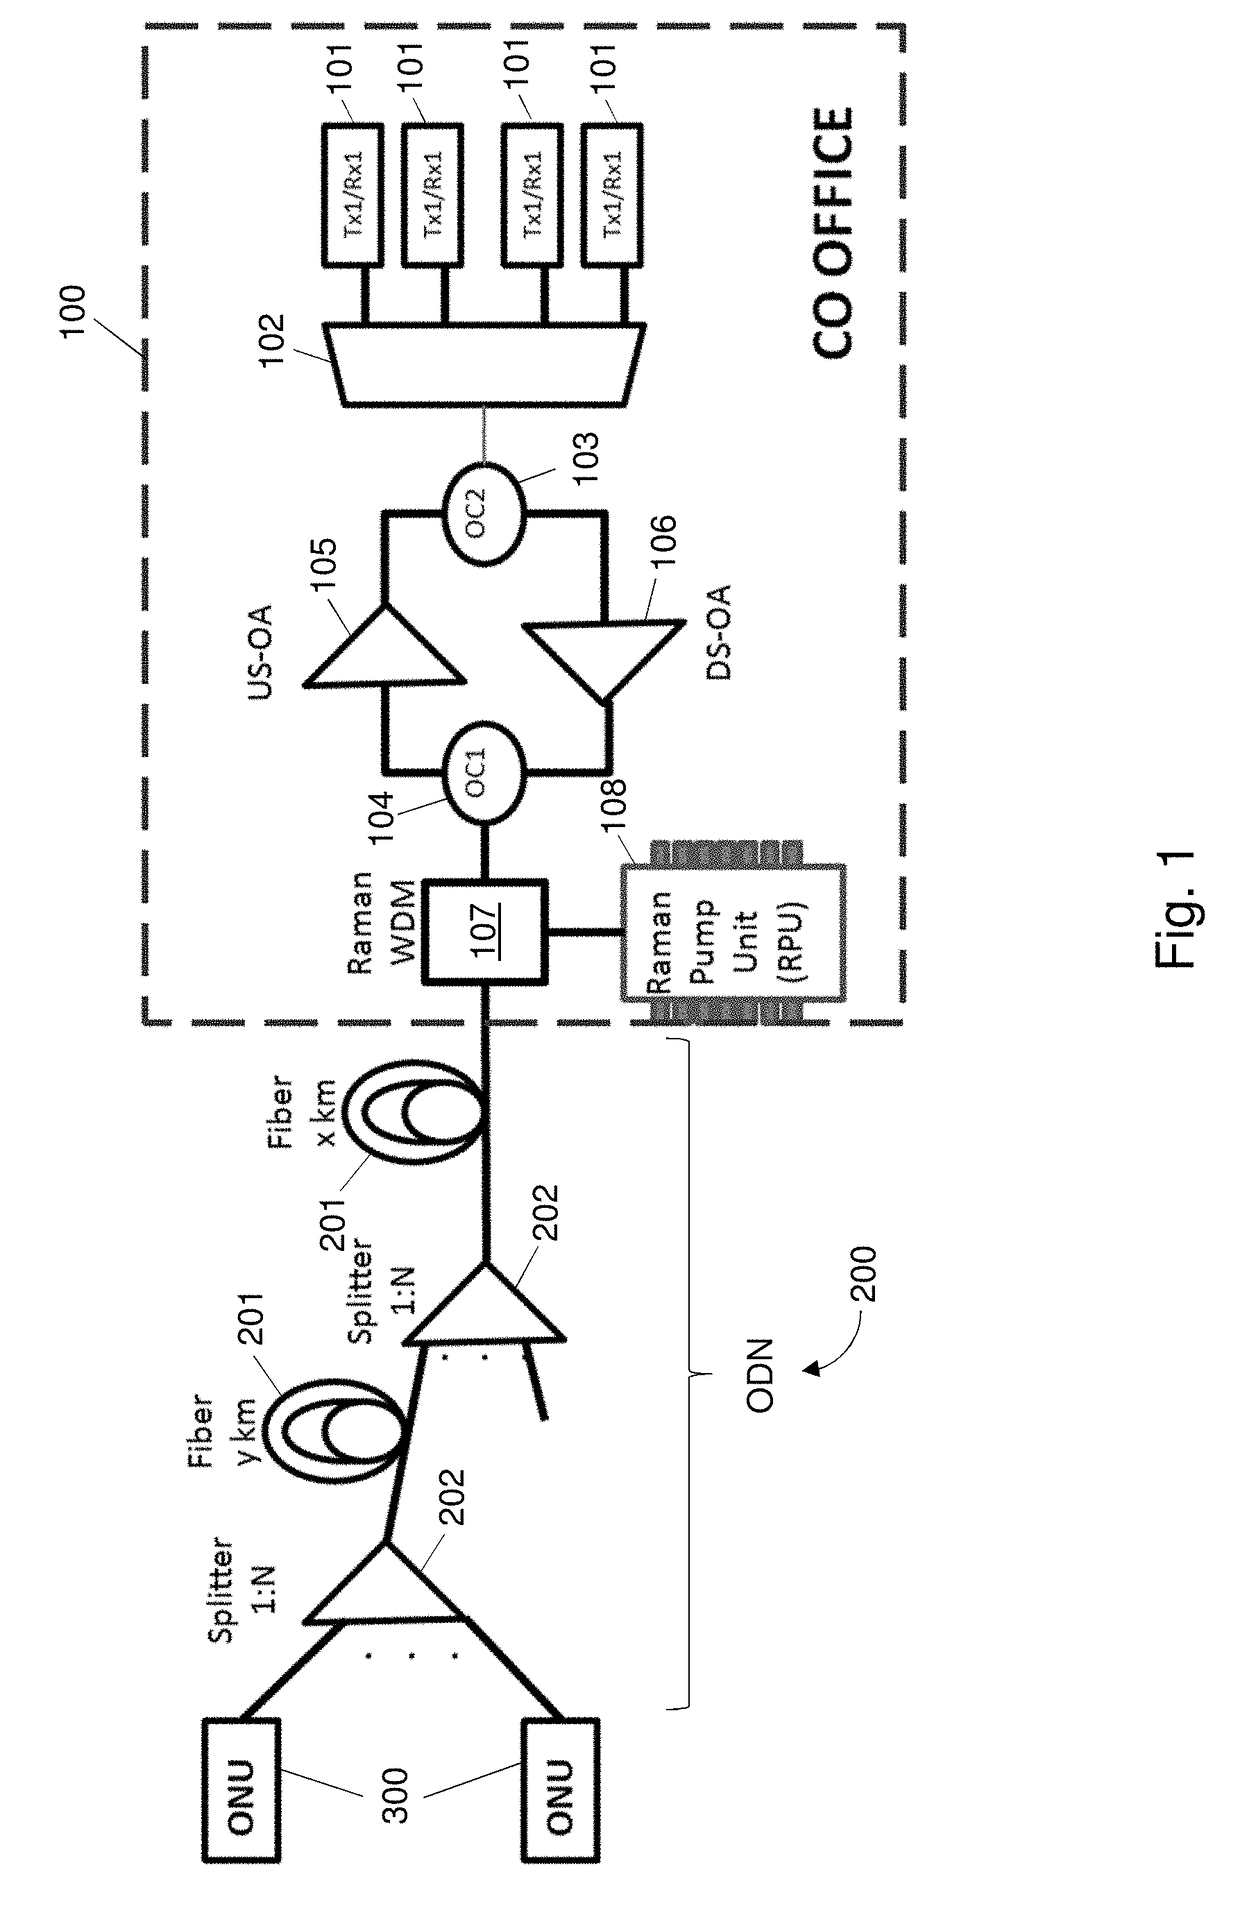 Extender For Optical Access Communication Network